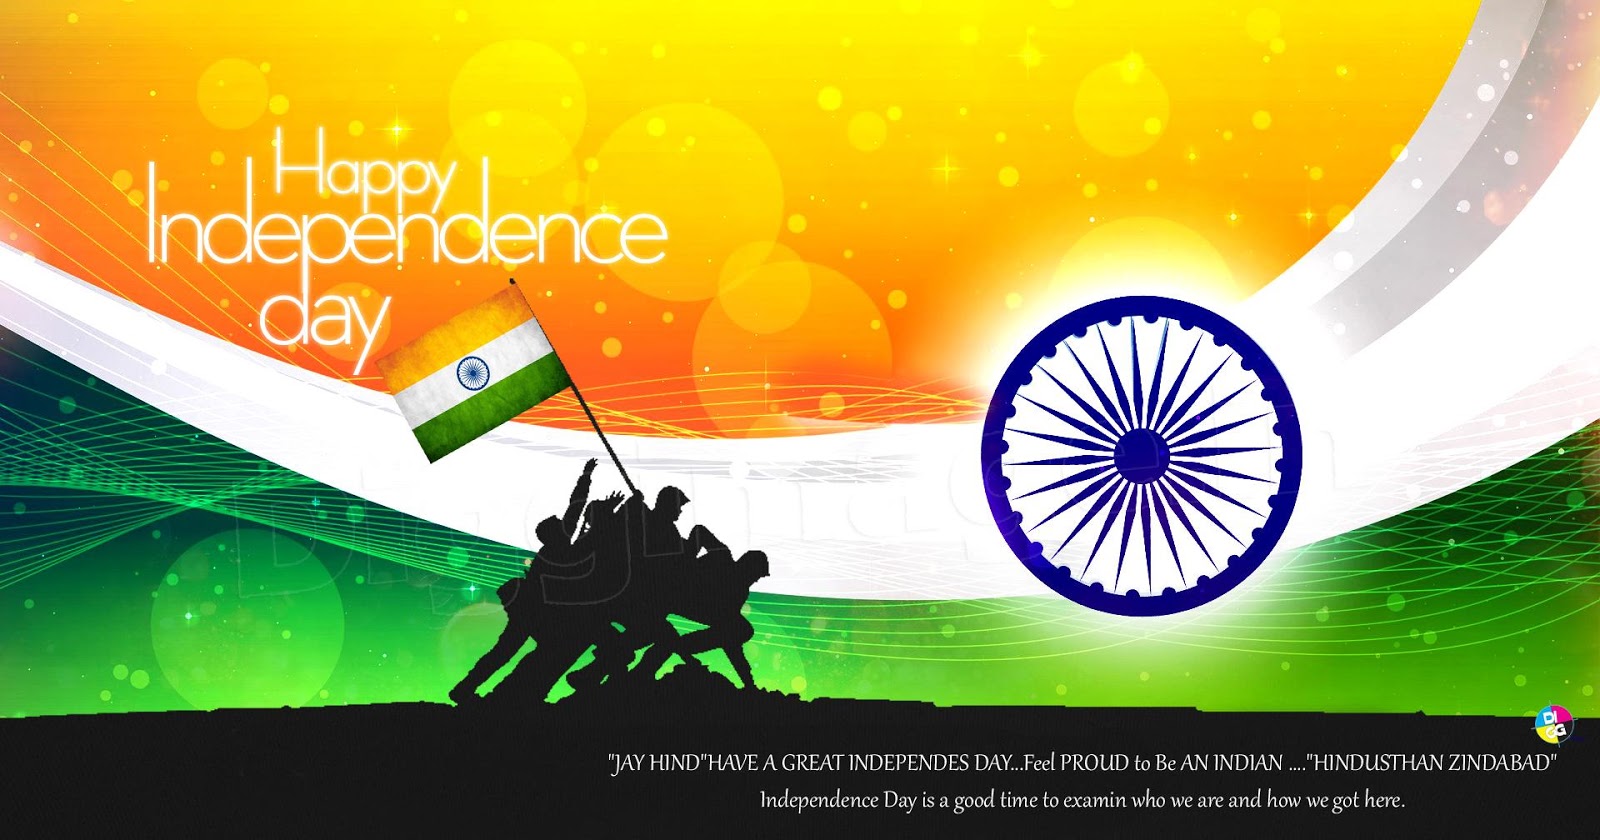 Free download Happy Independence Day Greetings wallpapers Images ...